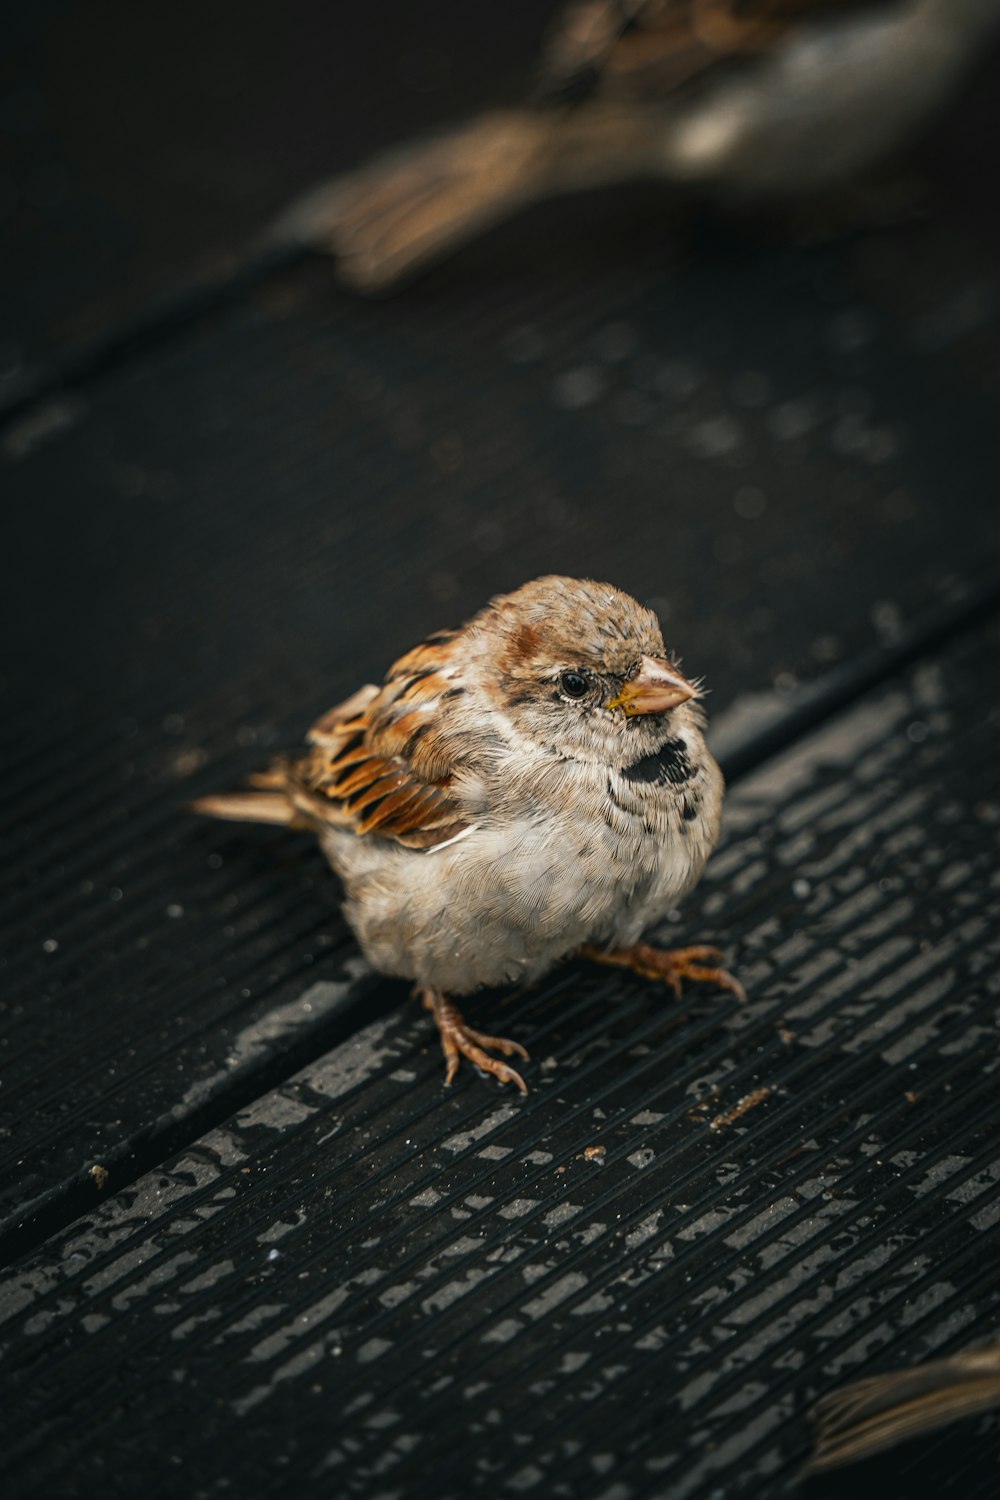 a small bird sitting on top of a wooden floor